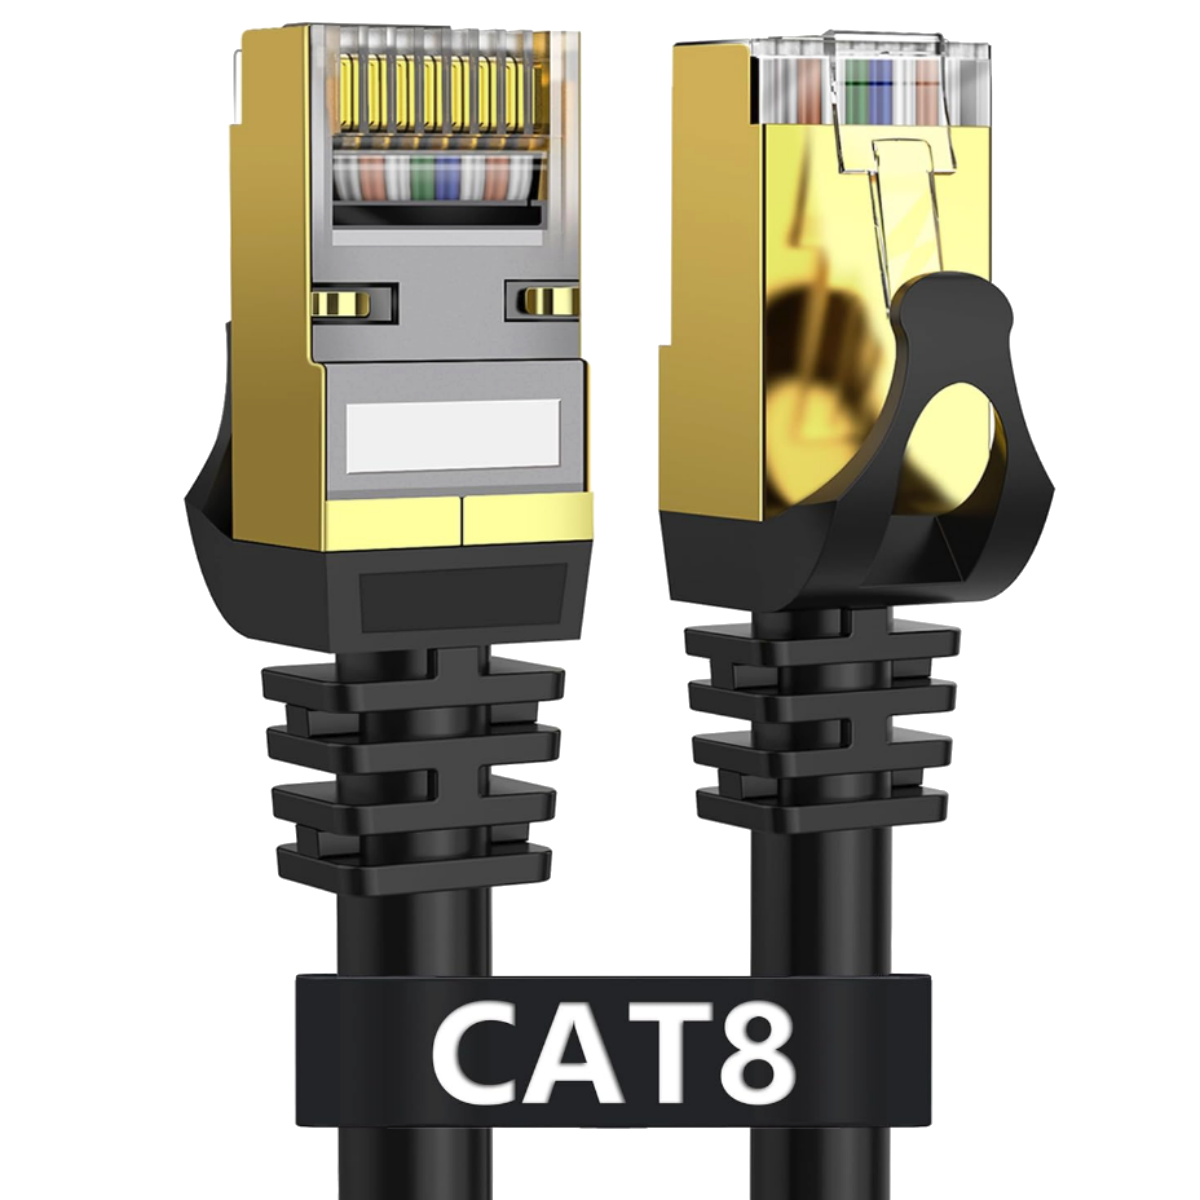 Both connectors of the Dacrown Cat 8 Ethernet Cable